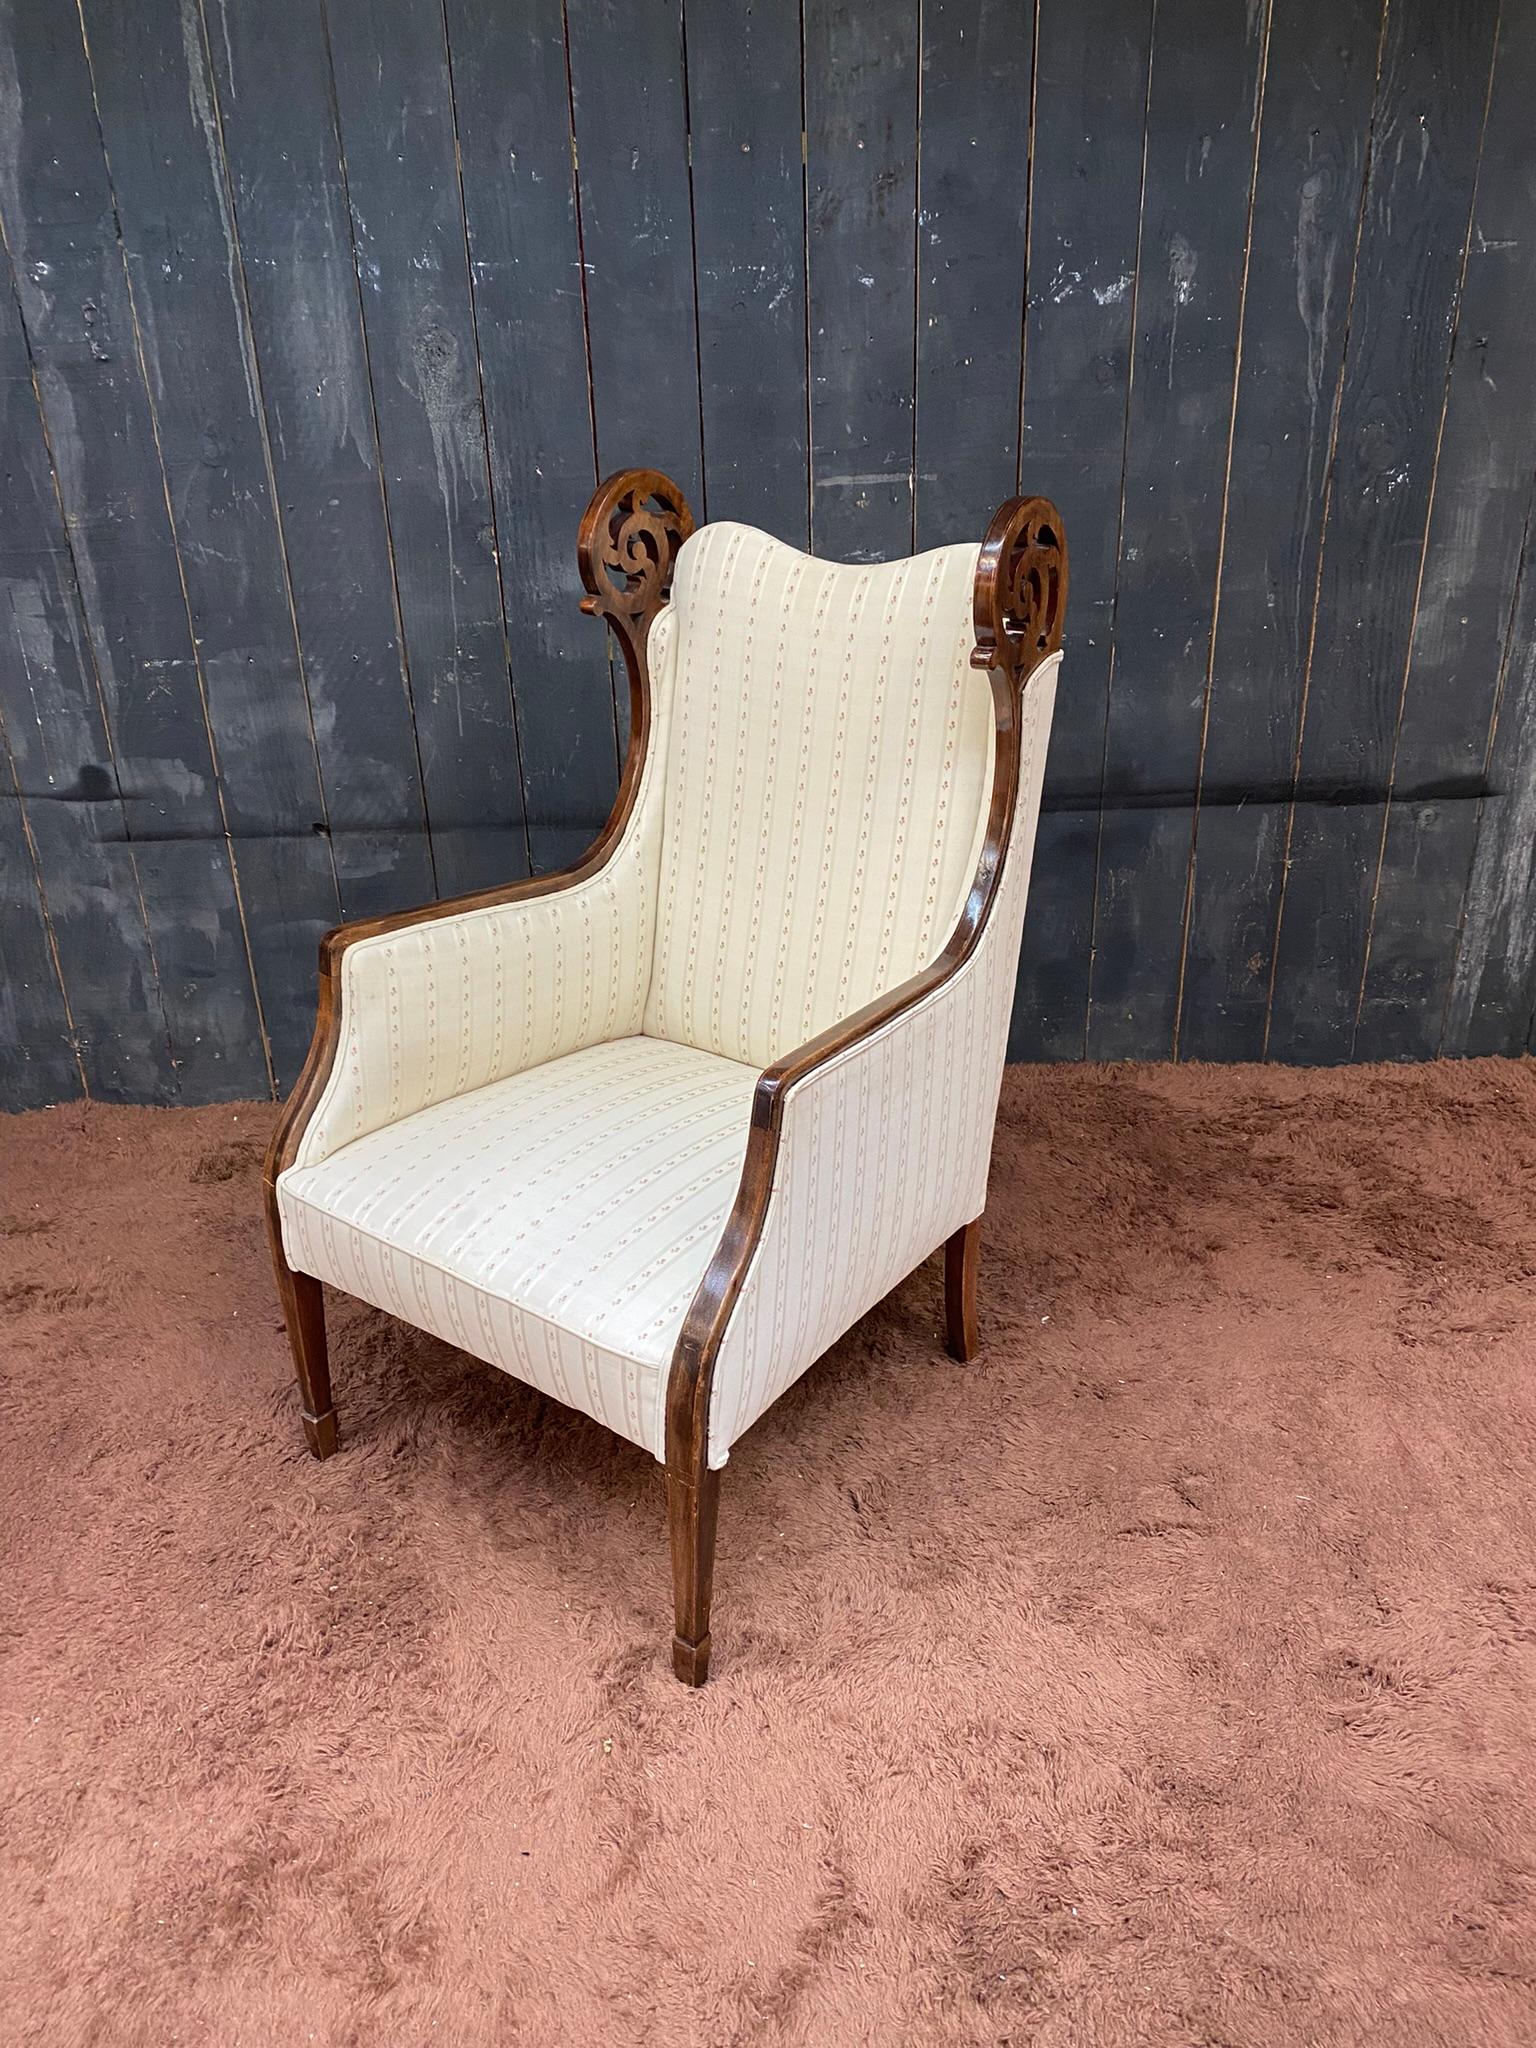 Original walnut wing chair, circa 1900.
Armchair reupholstered and refinished a short time ago,
small stains on the fabric.